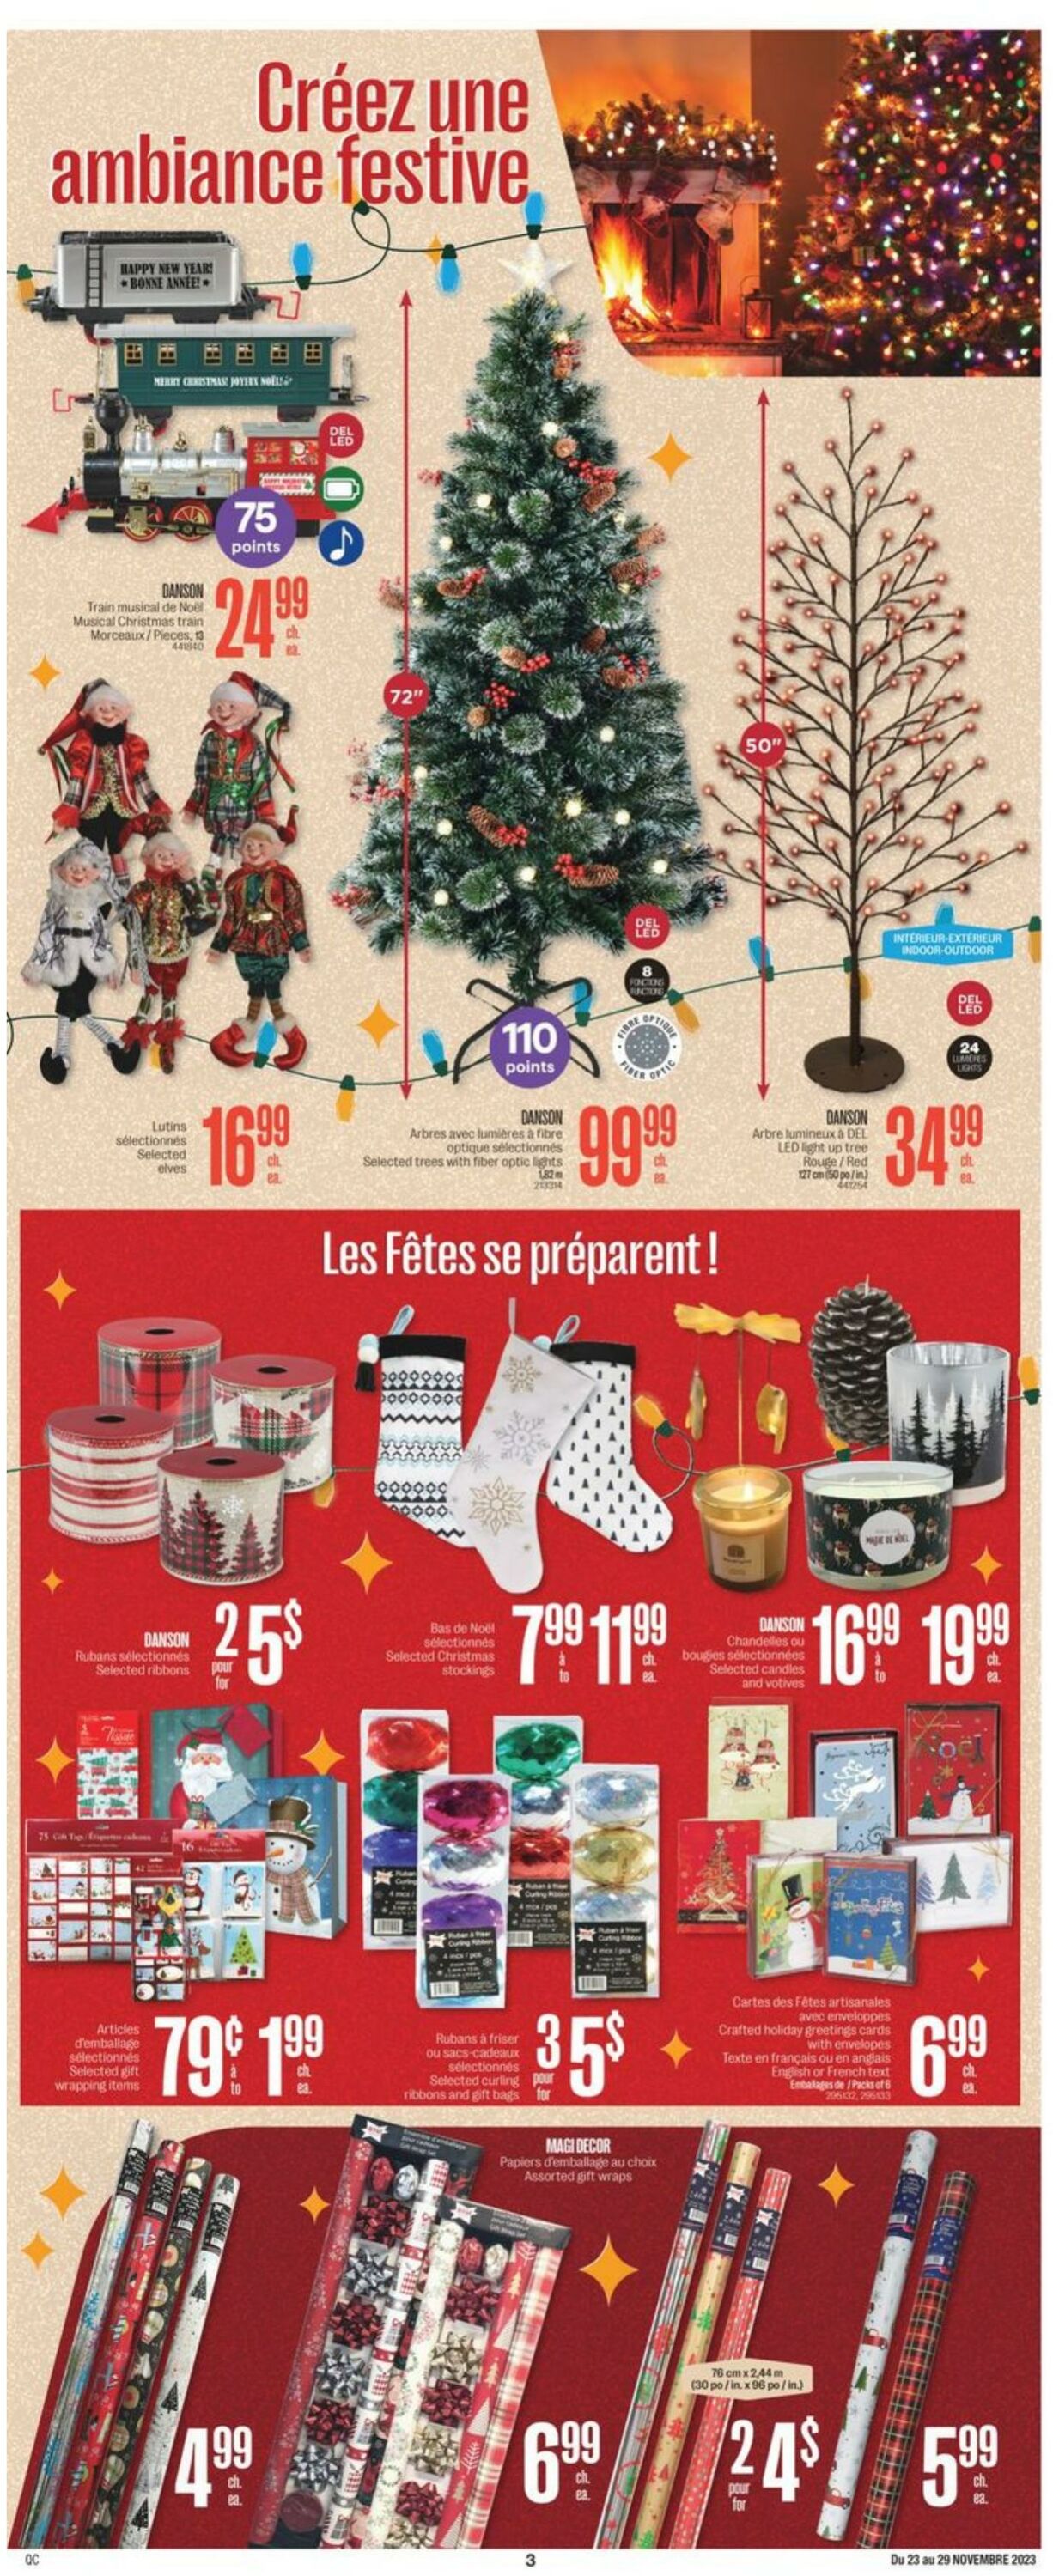 Jean Coutu Flyer from 11/23/2023